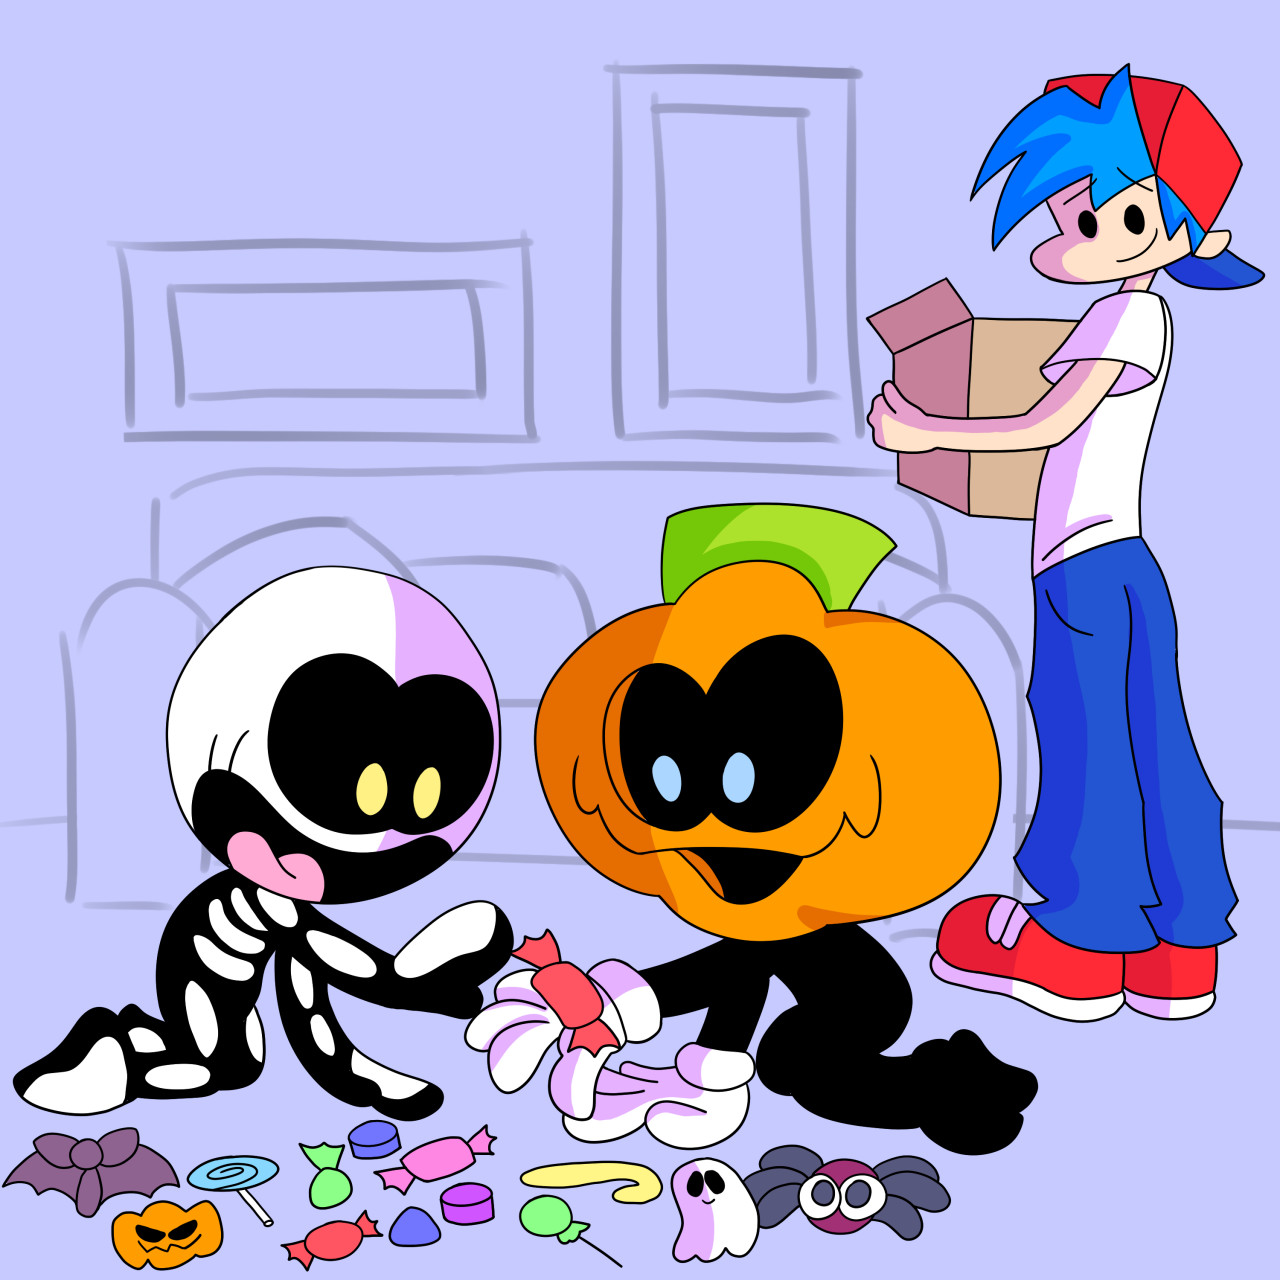 skid and pump doing the spooky month dance  Don't hug me i'm scared  fanart, Cute drawings, Baby animals super cute